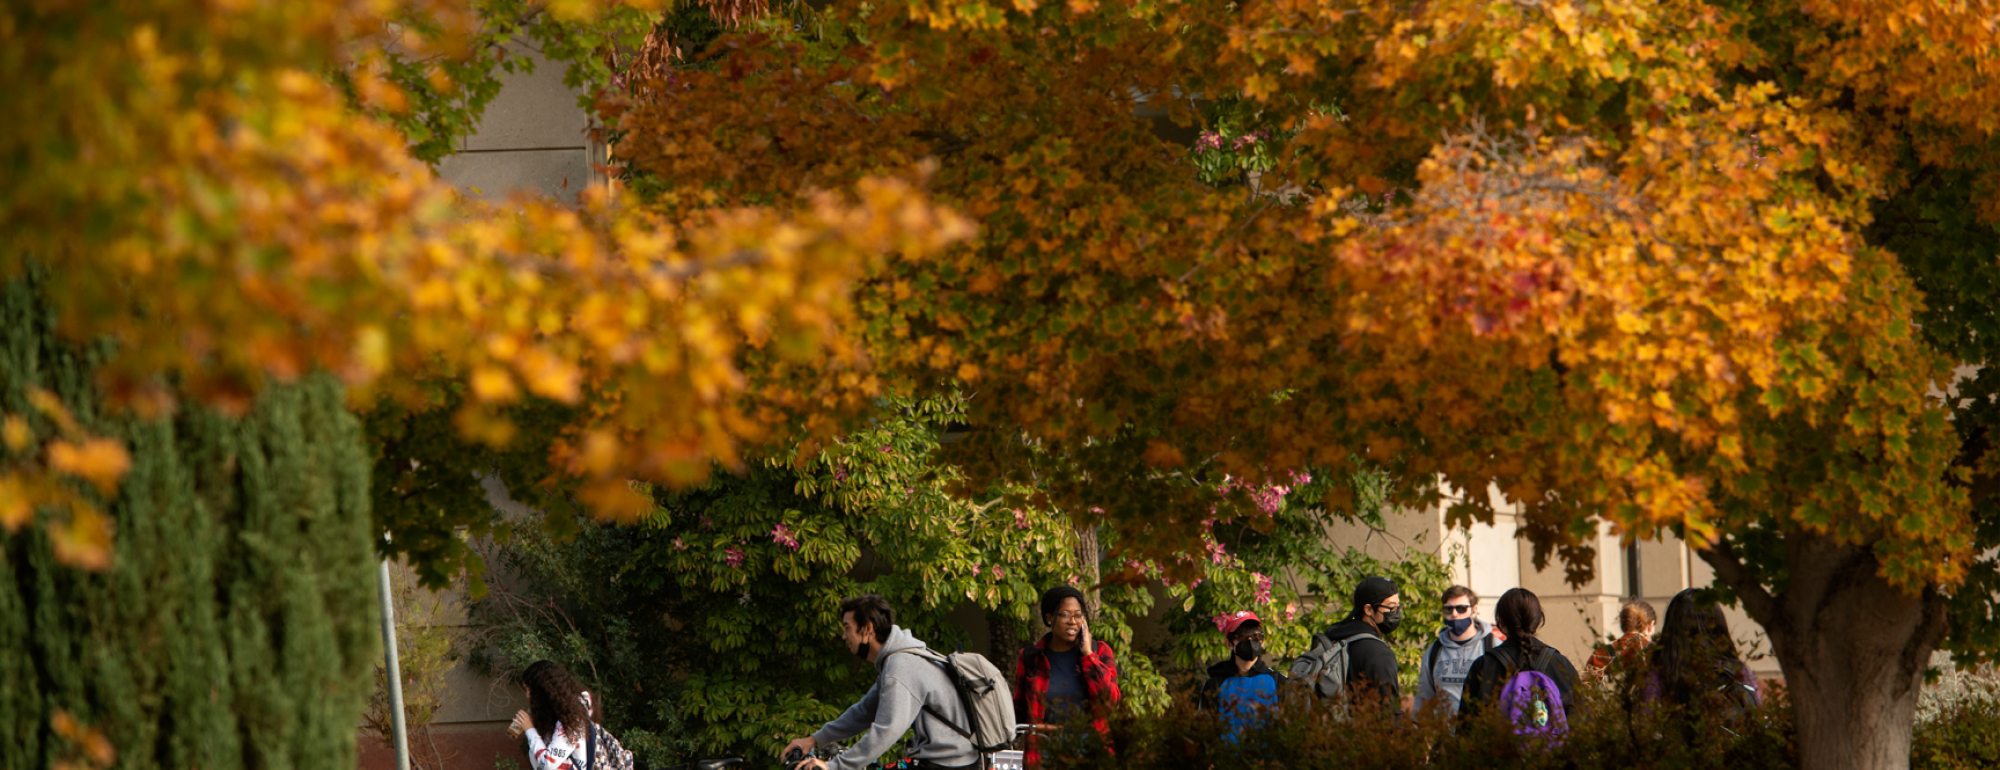 Fall colored trees on campus with students walking